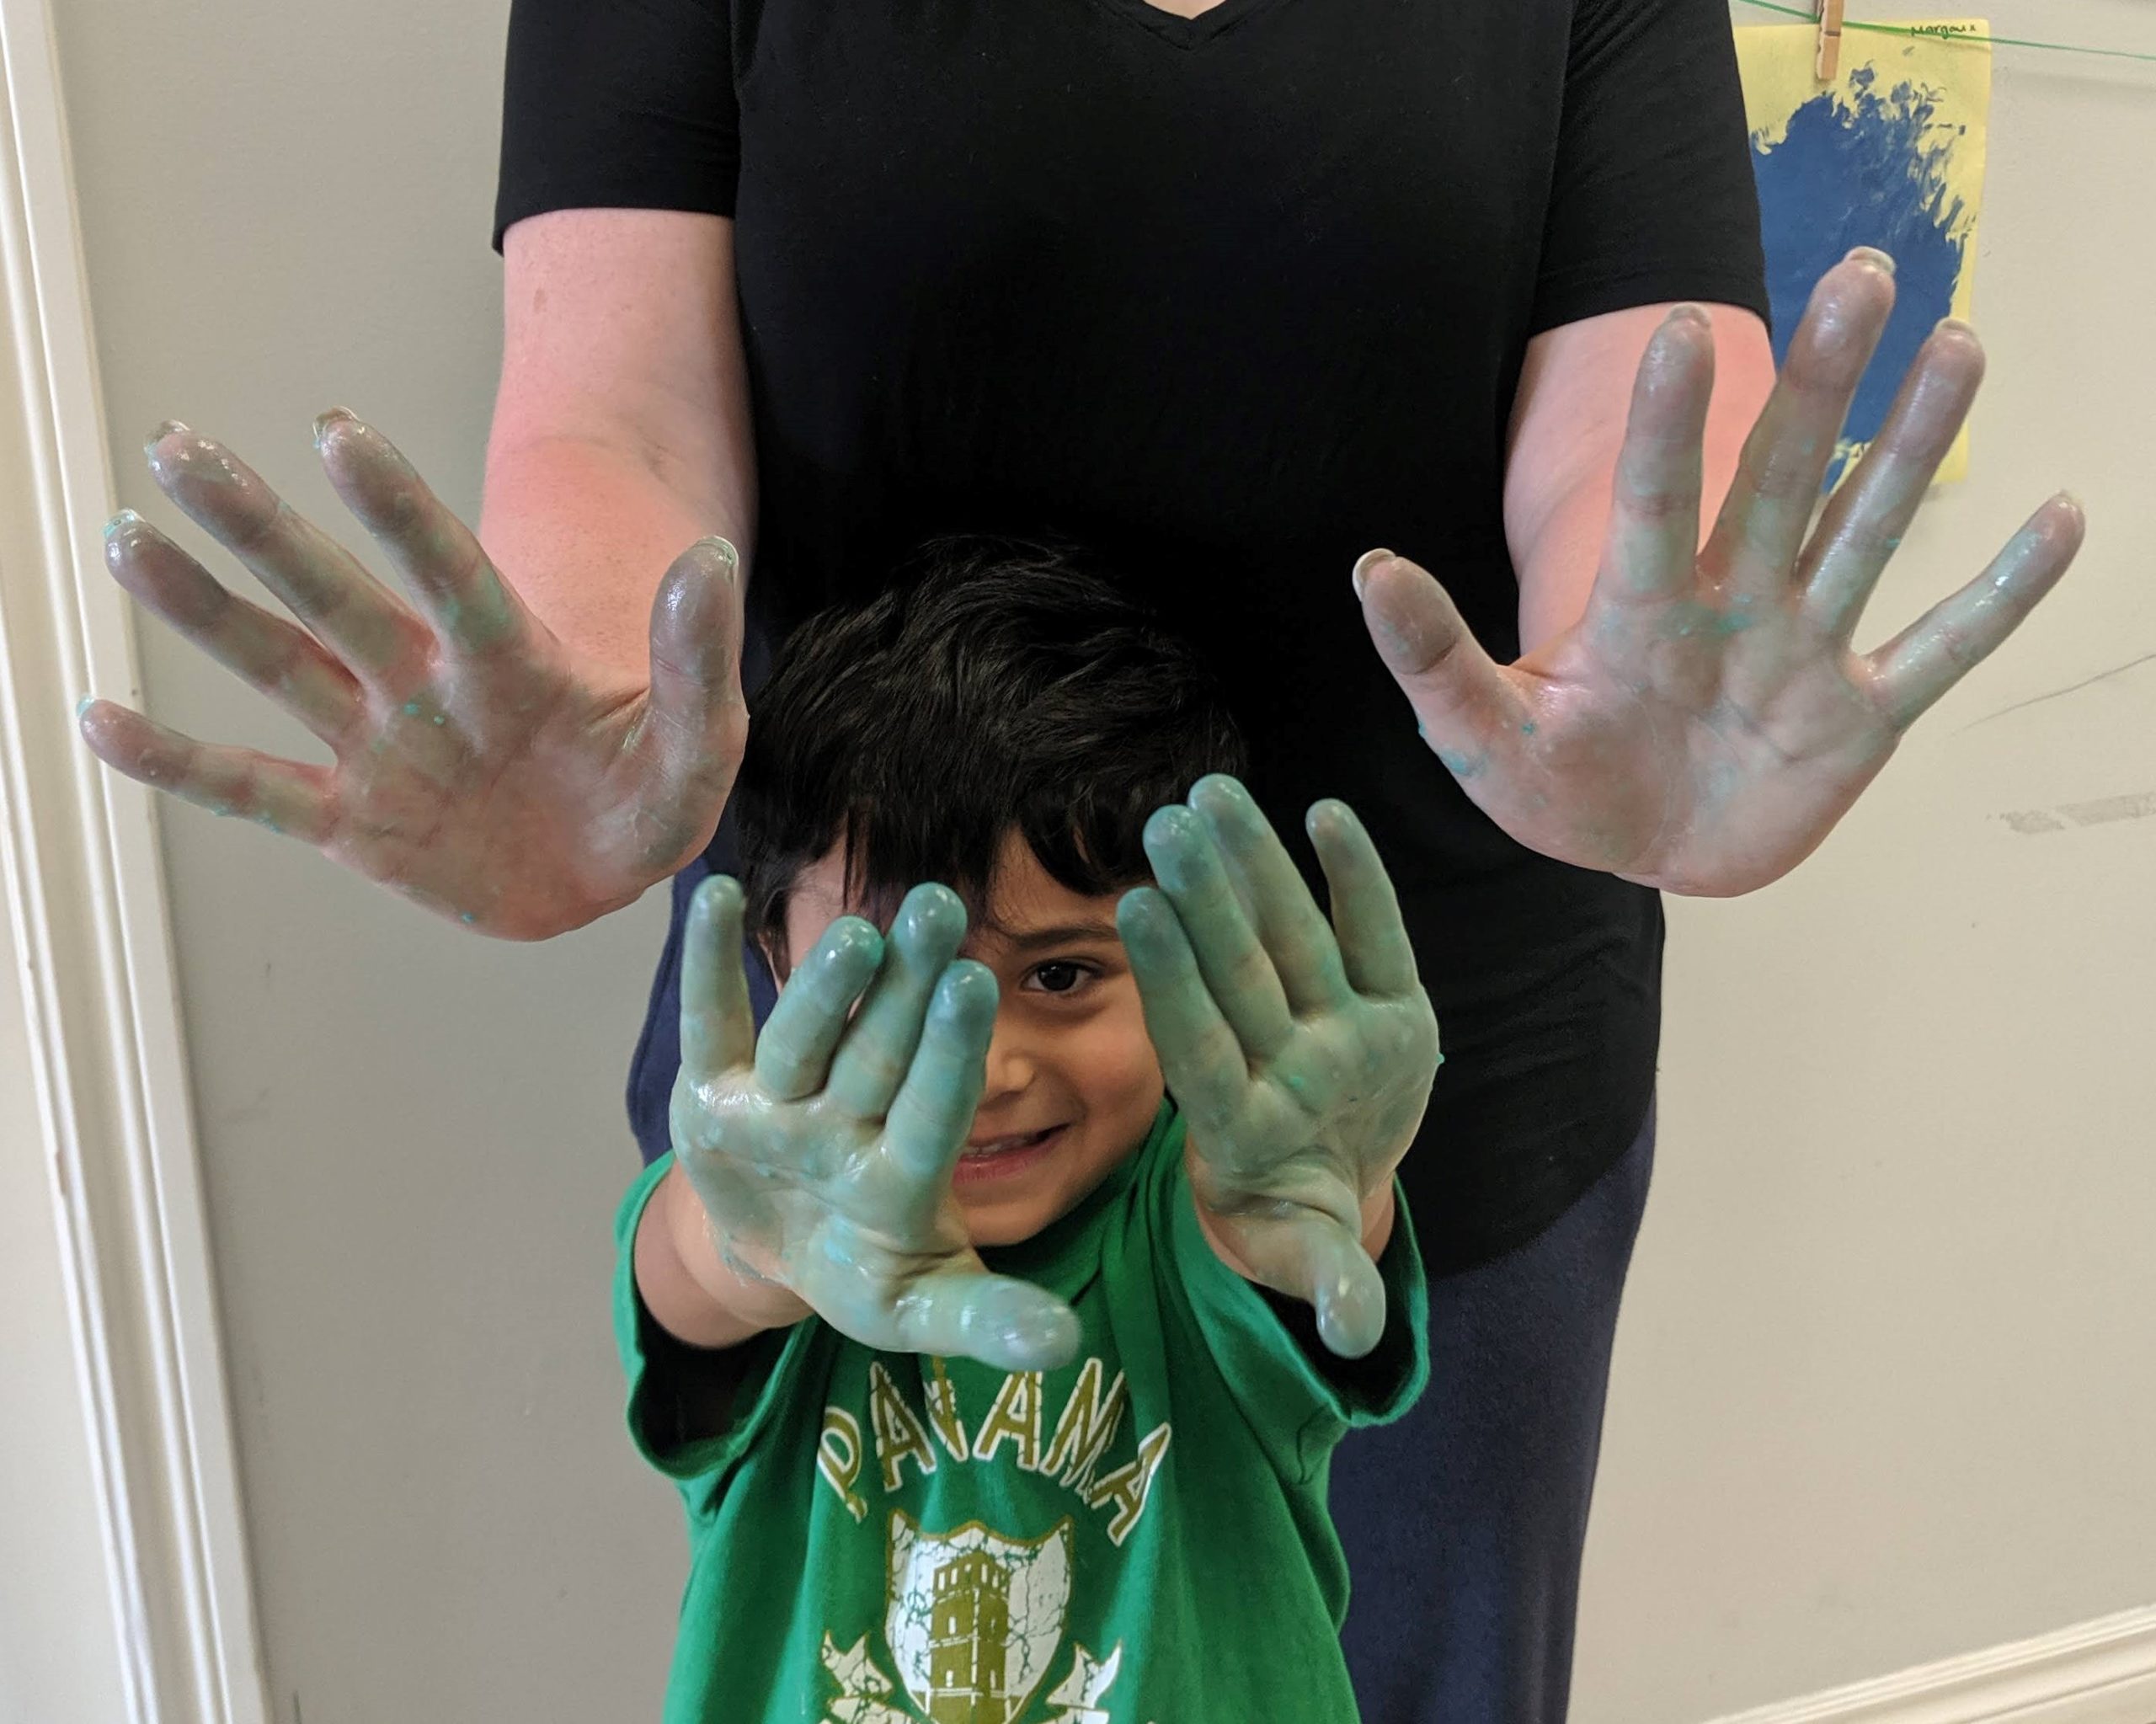 Germs on Little Hands